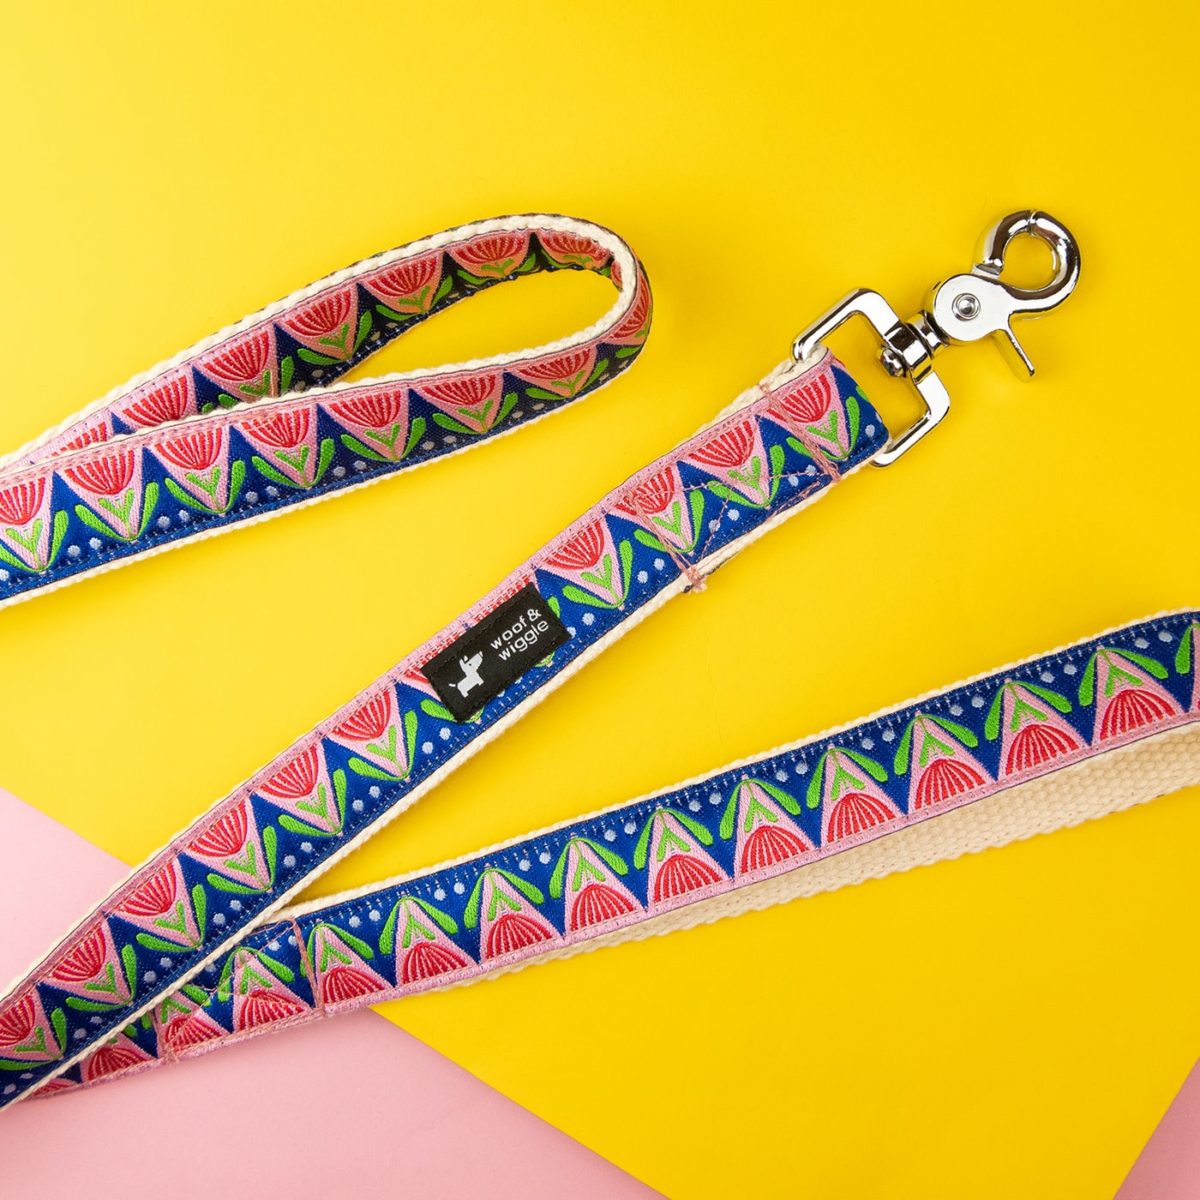 Dog leash with abstract floral design